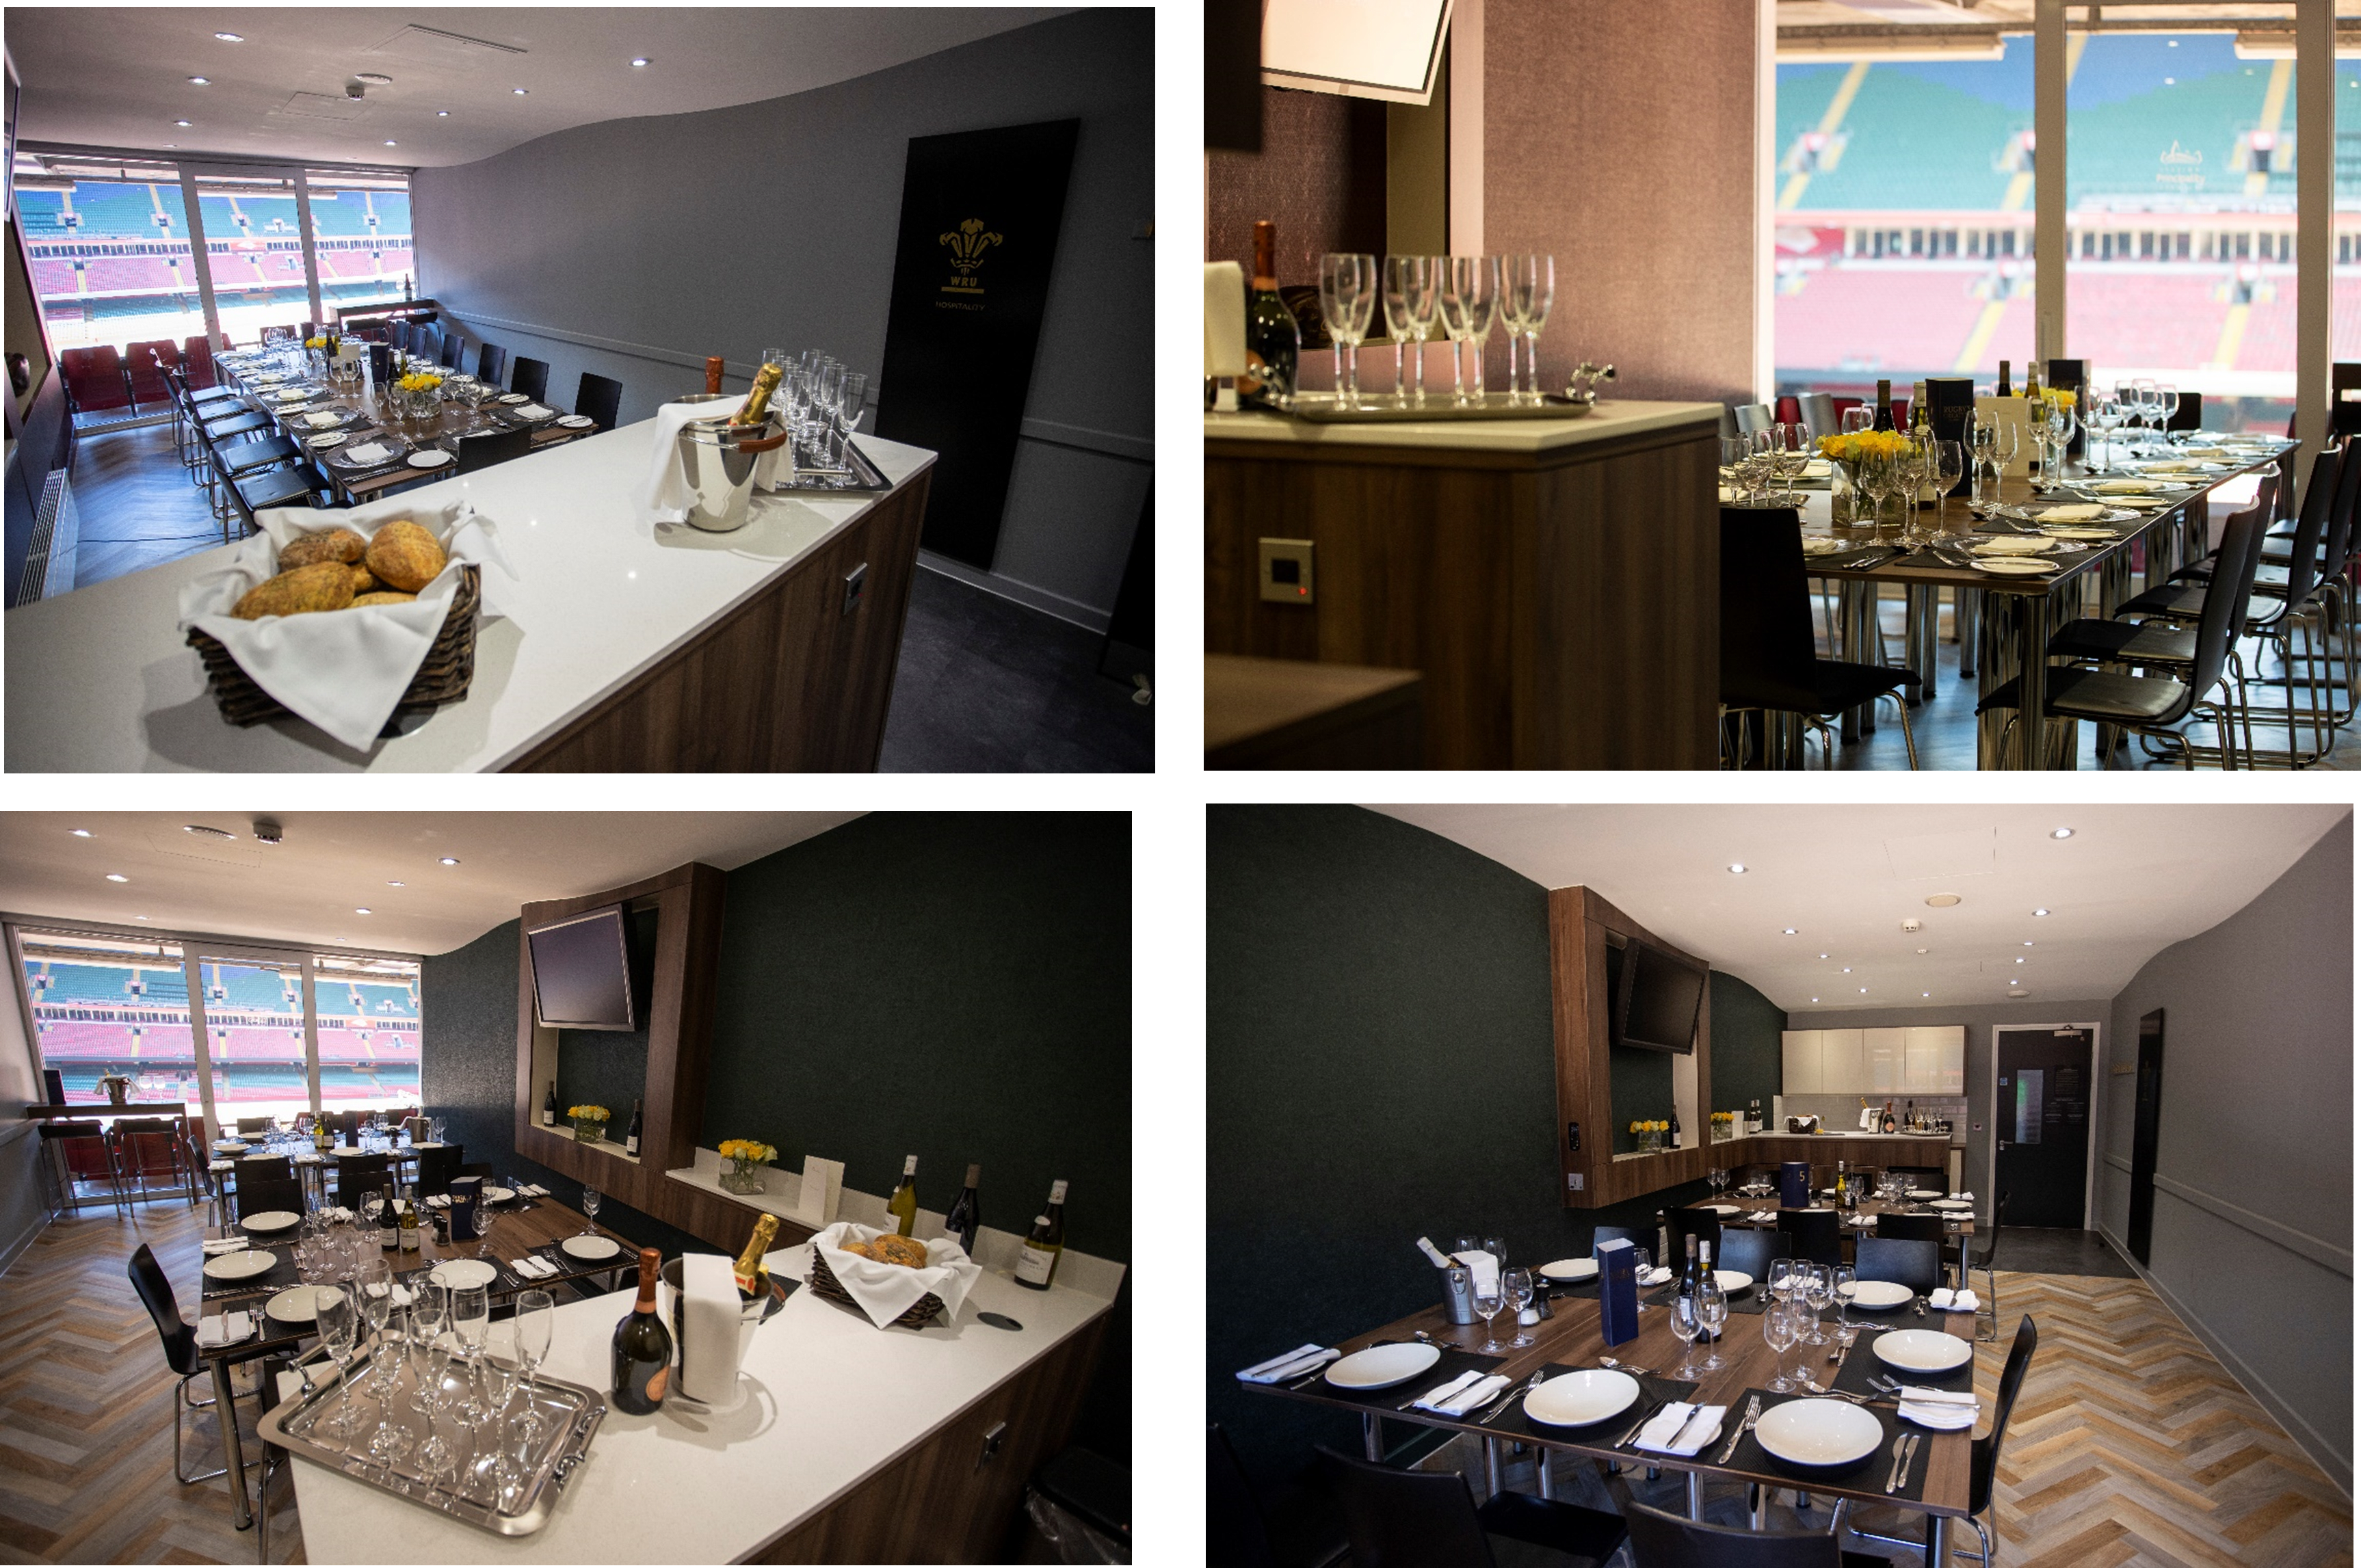 Private suite hospitality including set table and drinks at the Principality Stadium